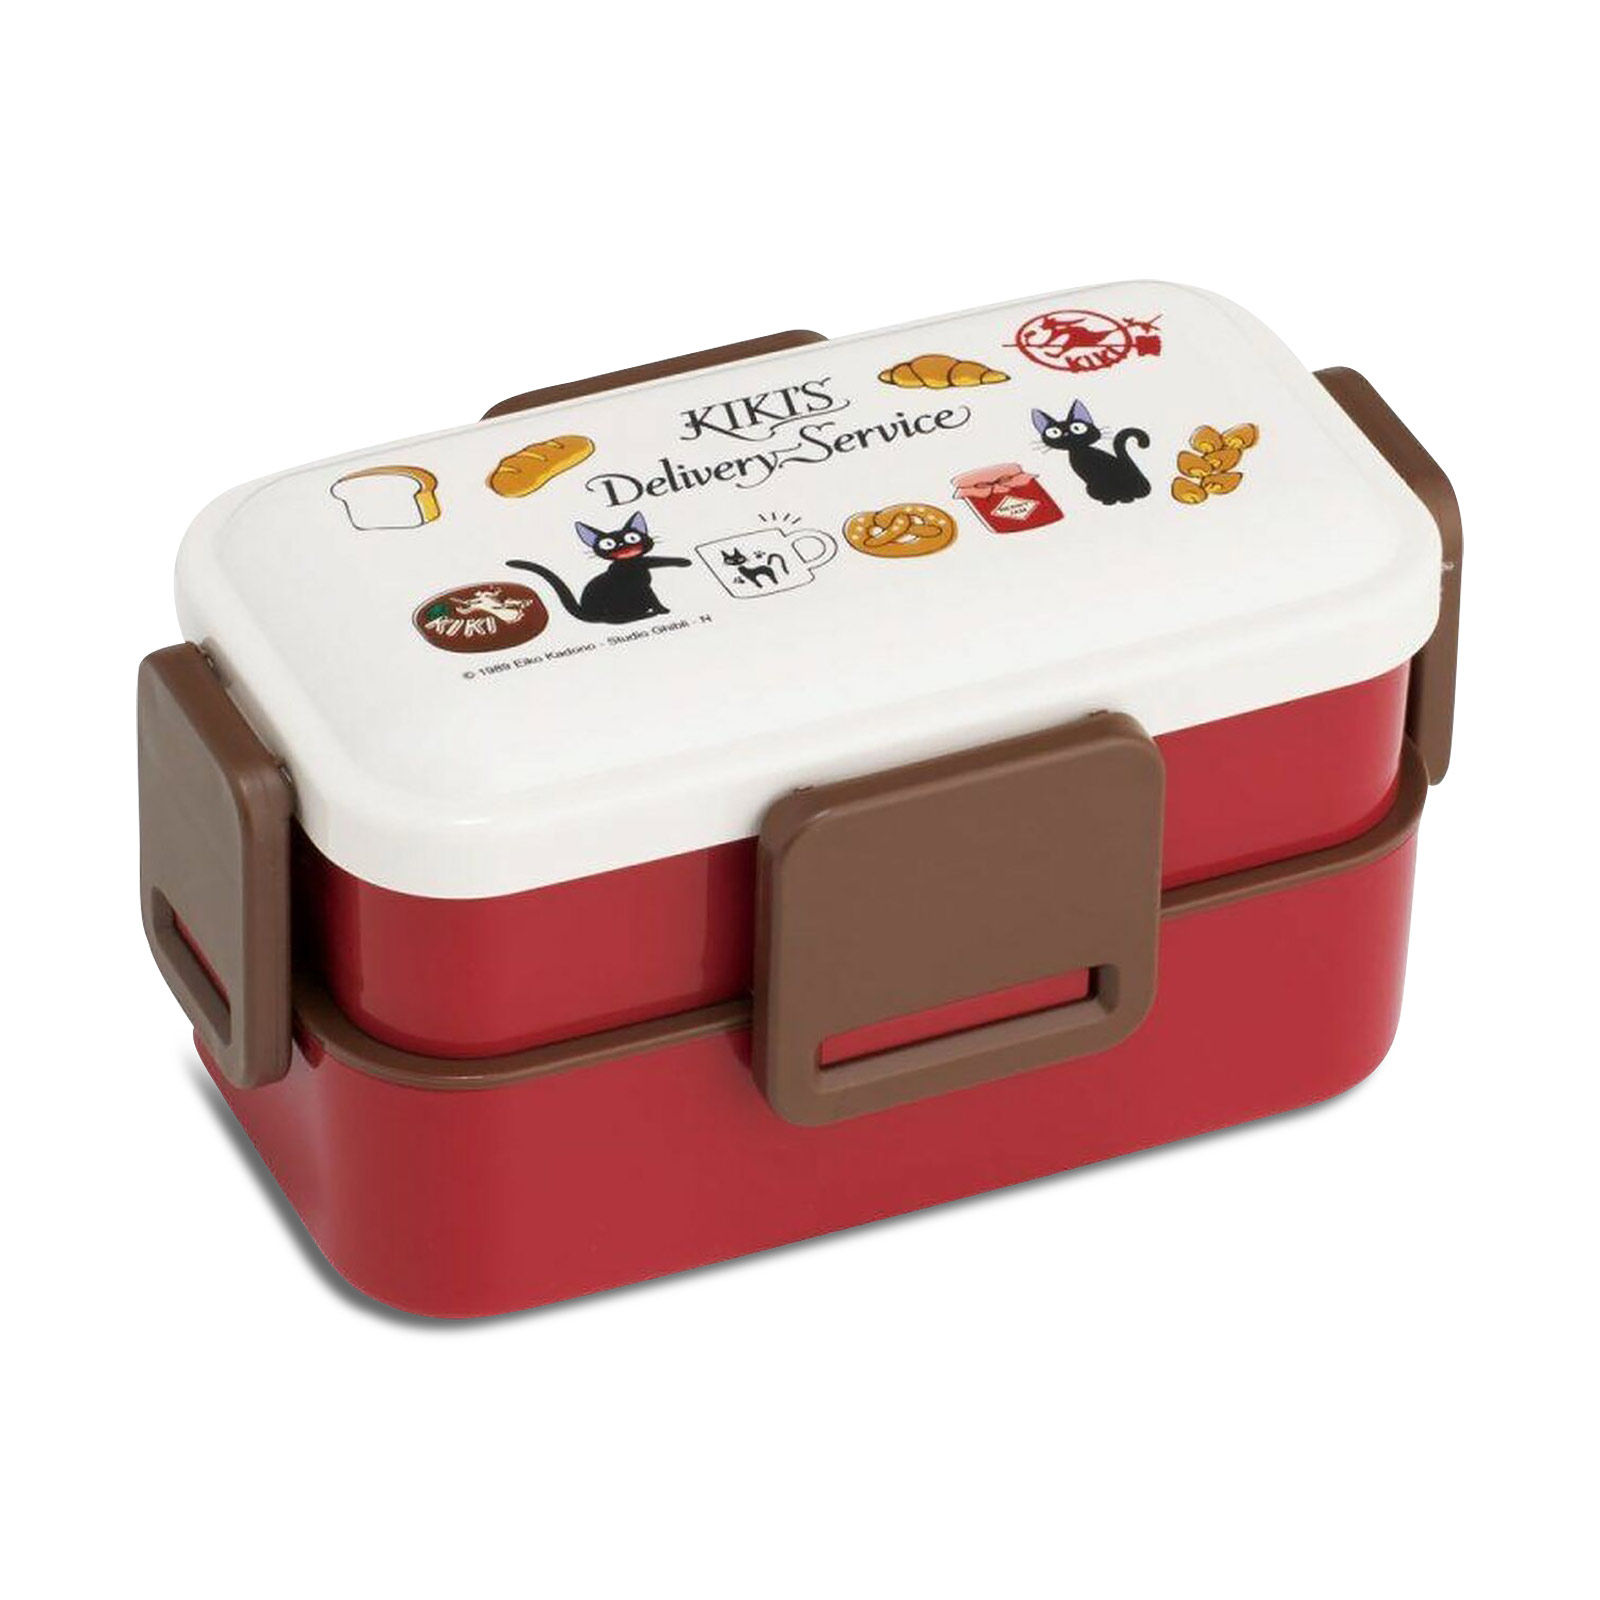 Kiki's Little Delivery Service - Bakery Lunchbox